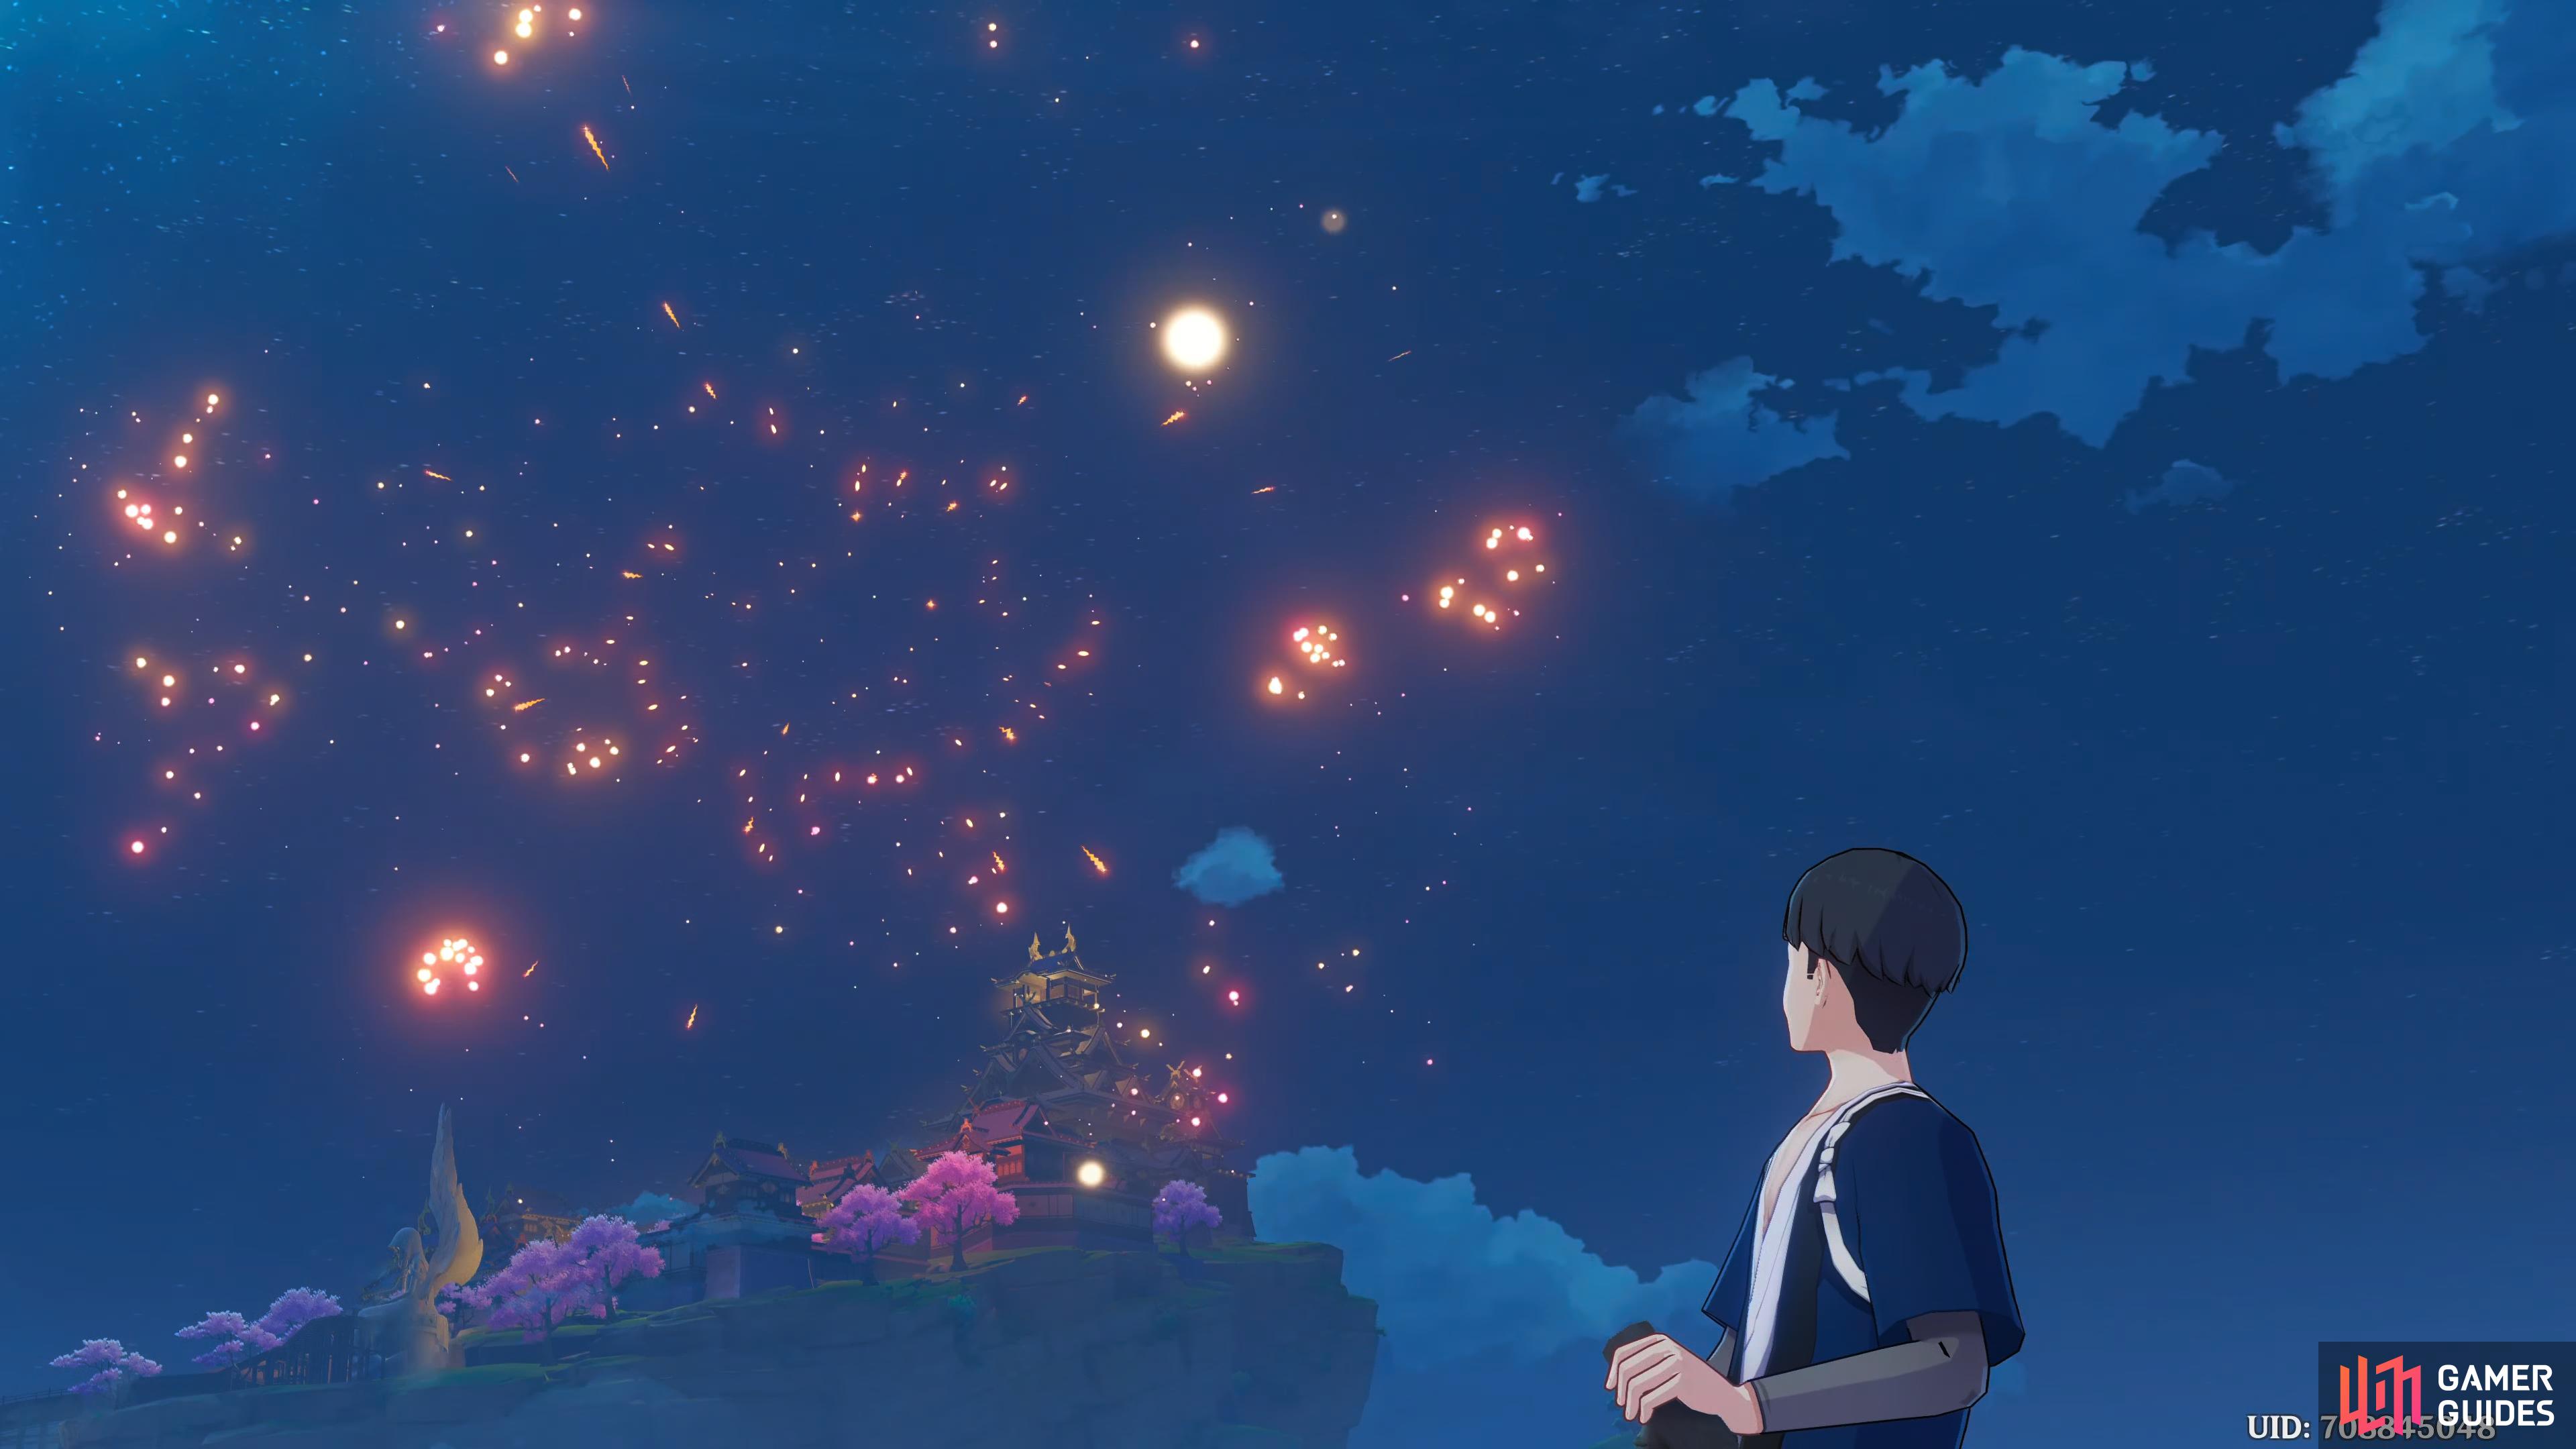 Sakijirou looks at the fireworks and weeps as he makes his escape.